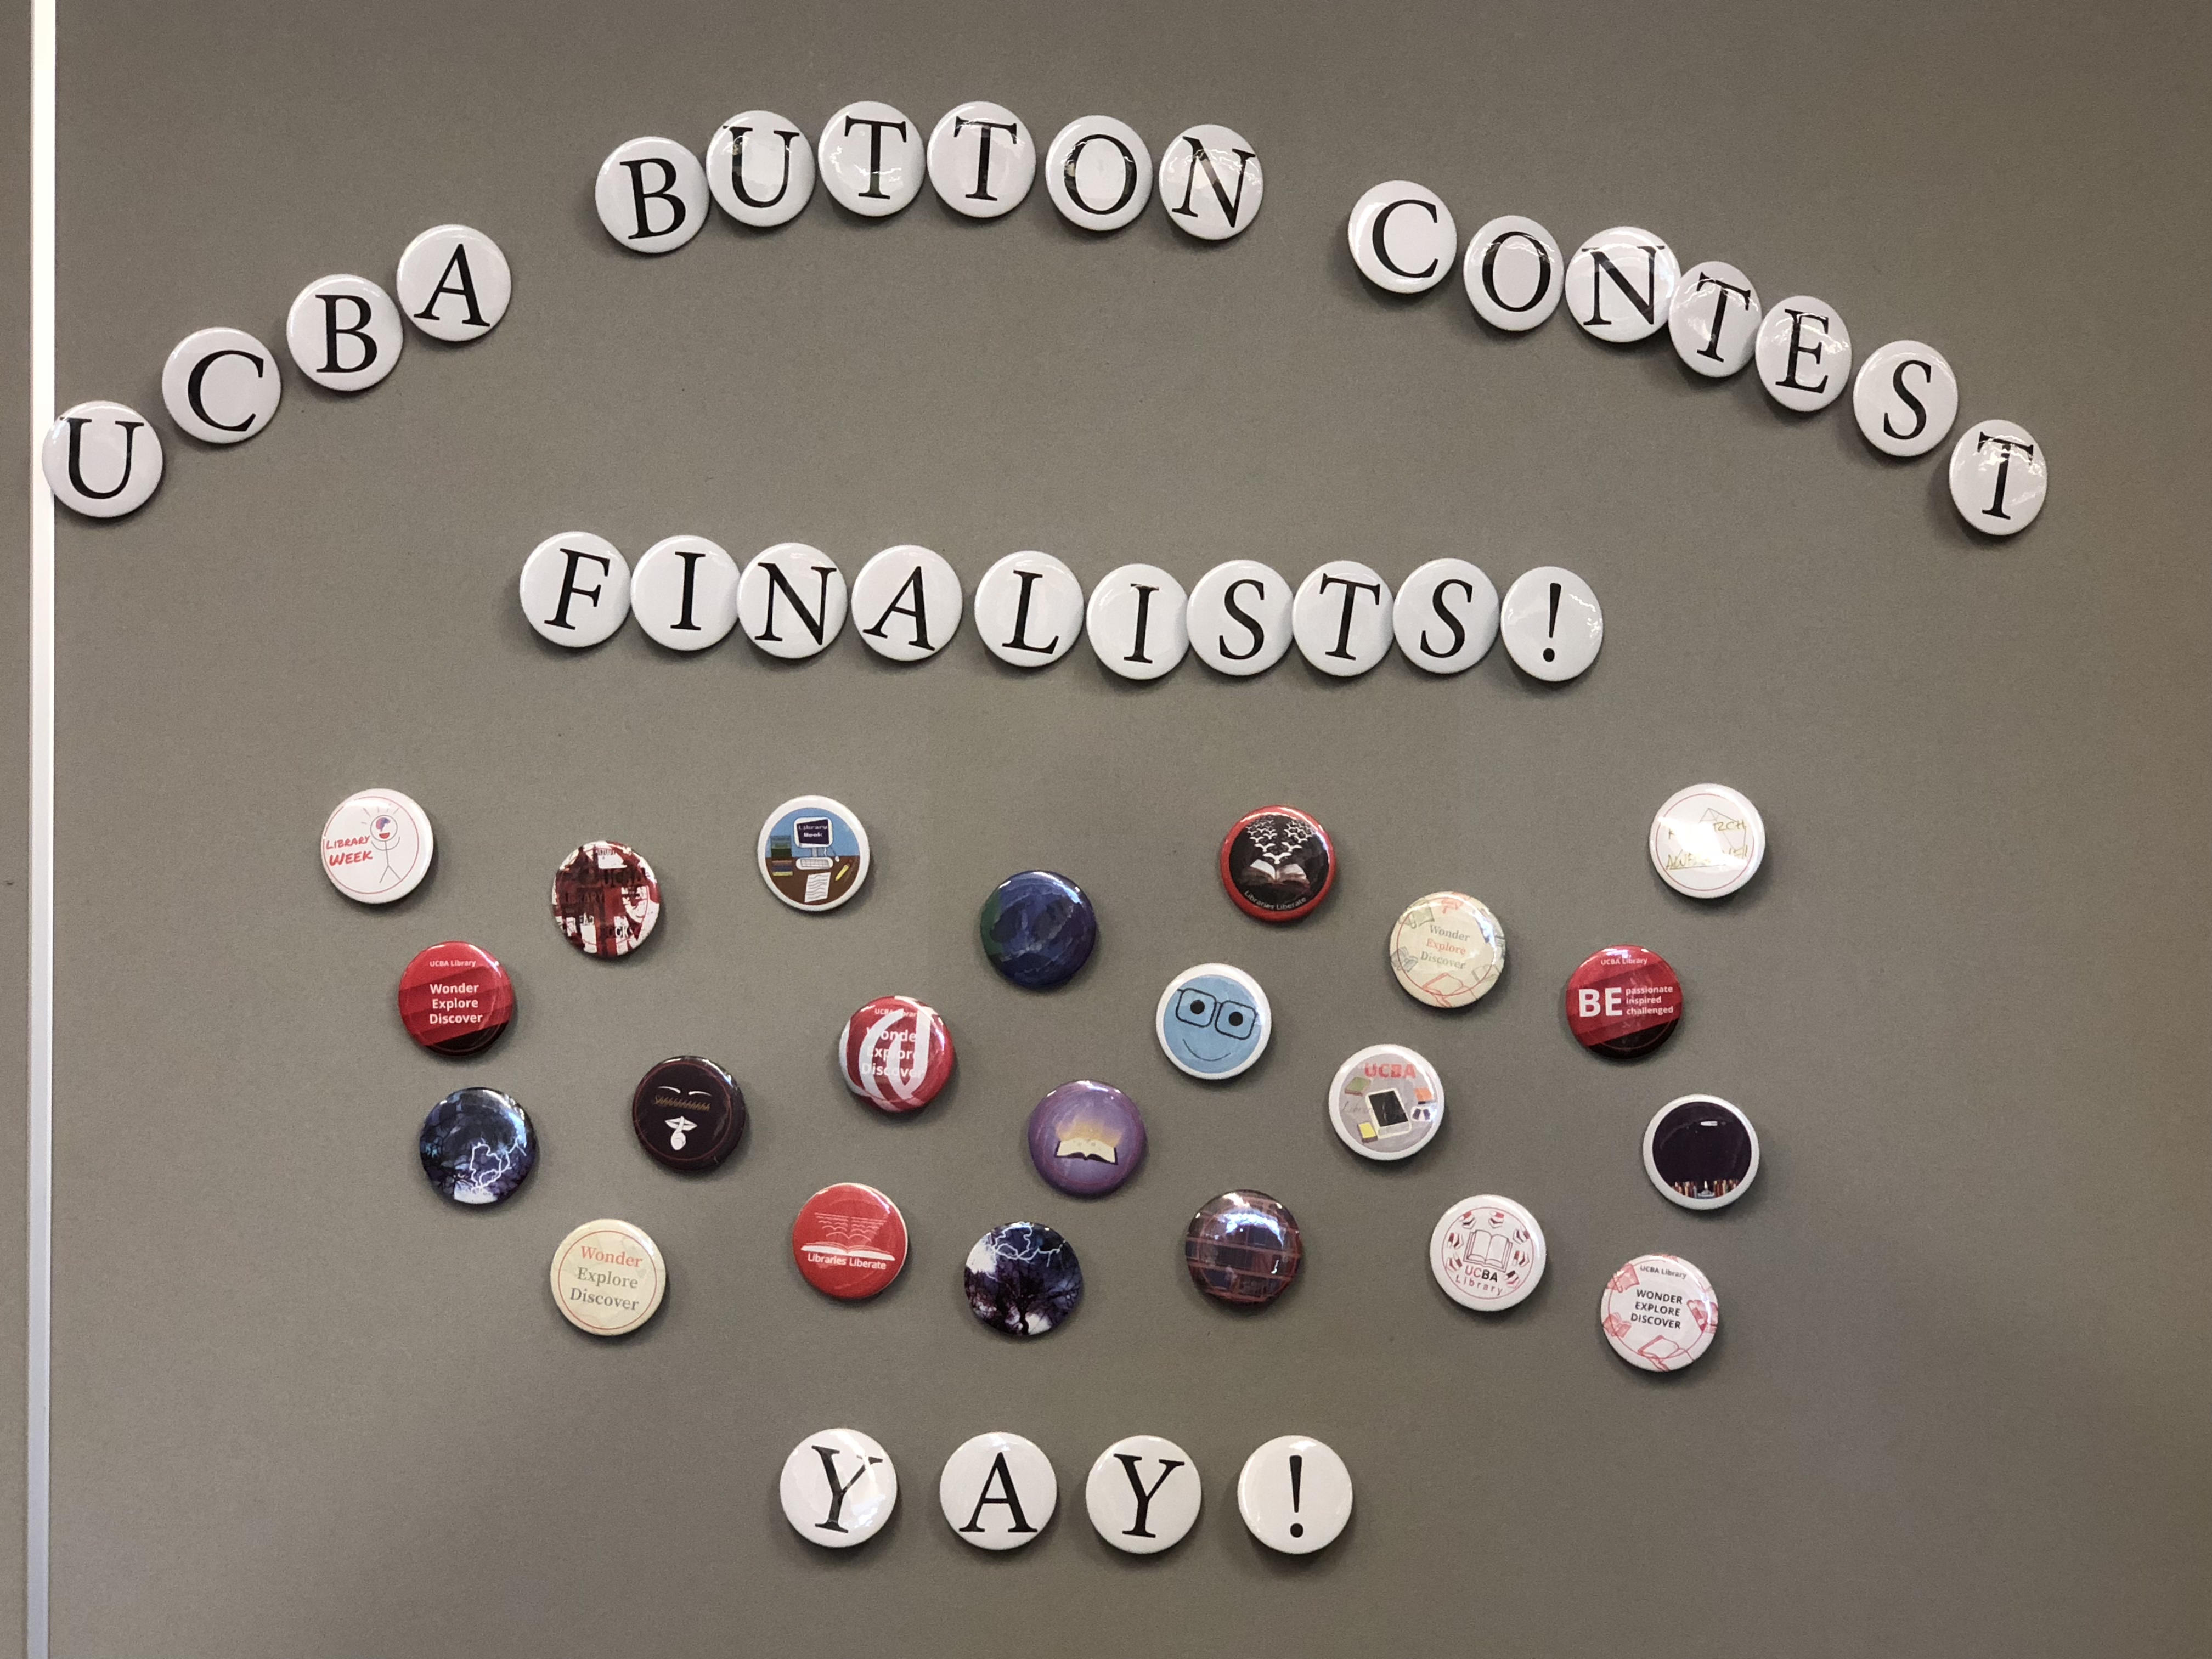 Button Contest Finalists on display